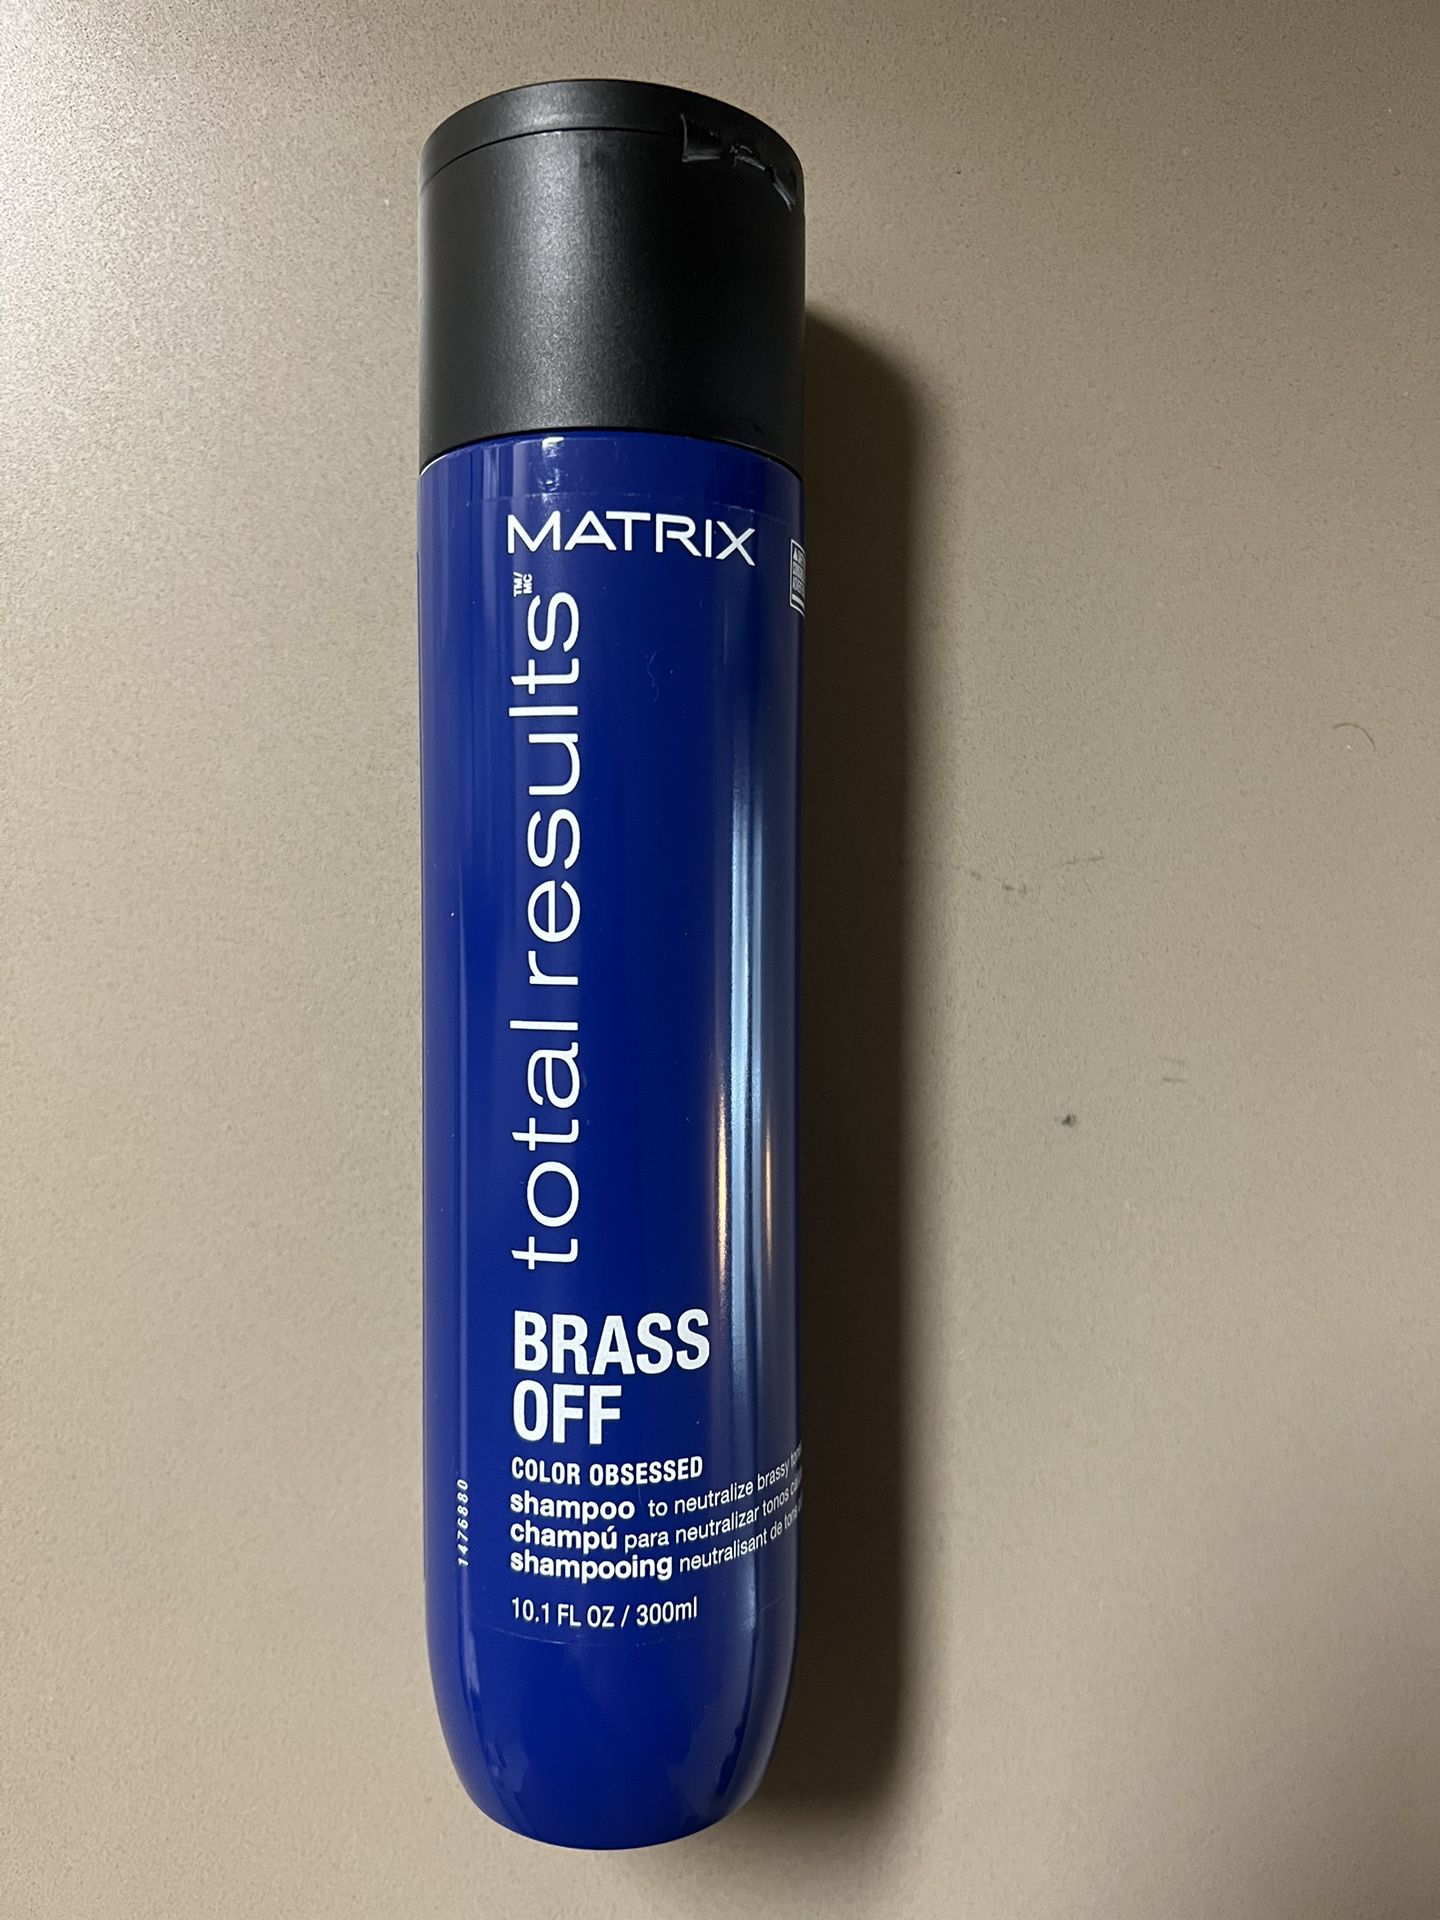 Matrix Total Results Brass Off Color Obsessed 300ml $10